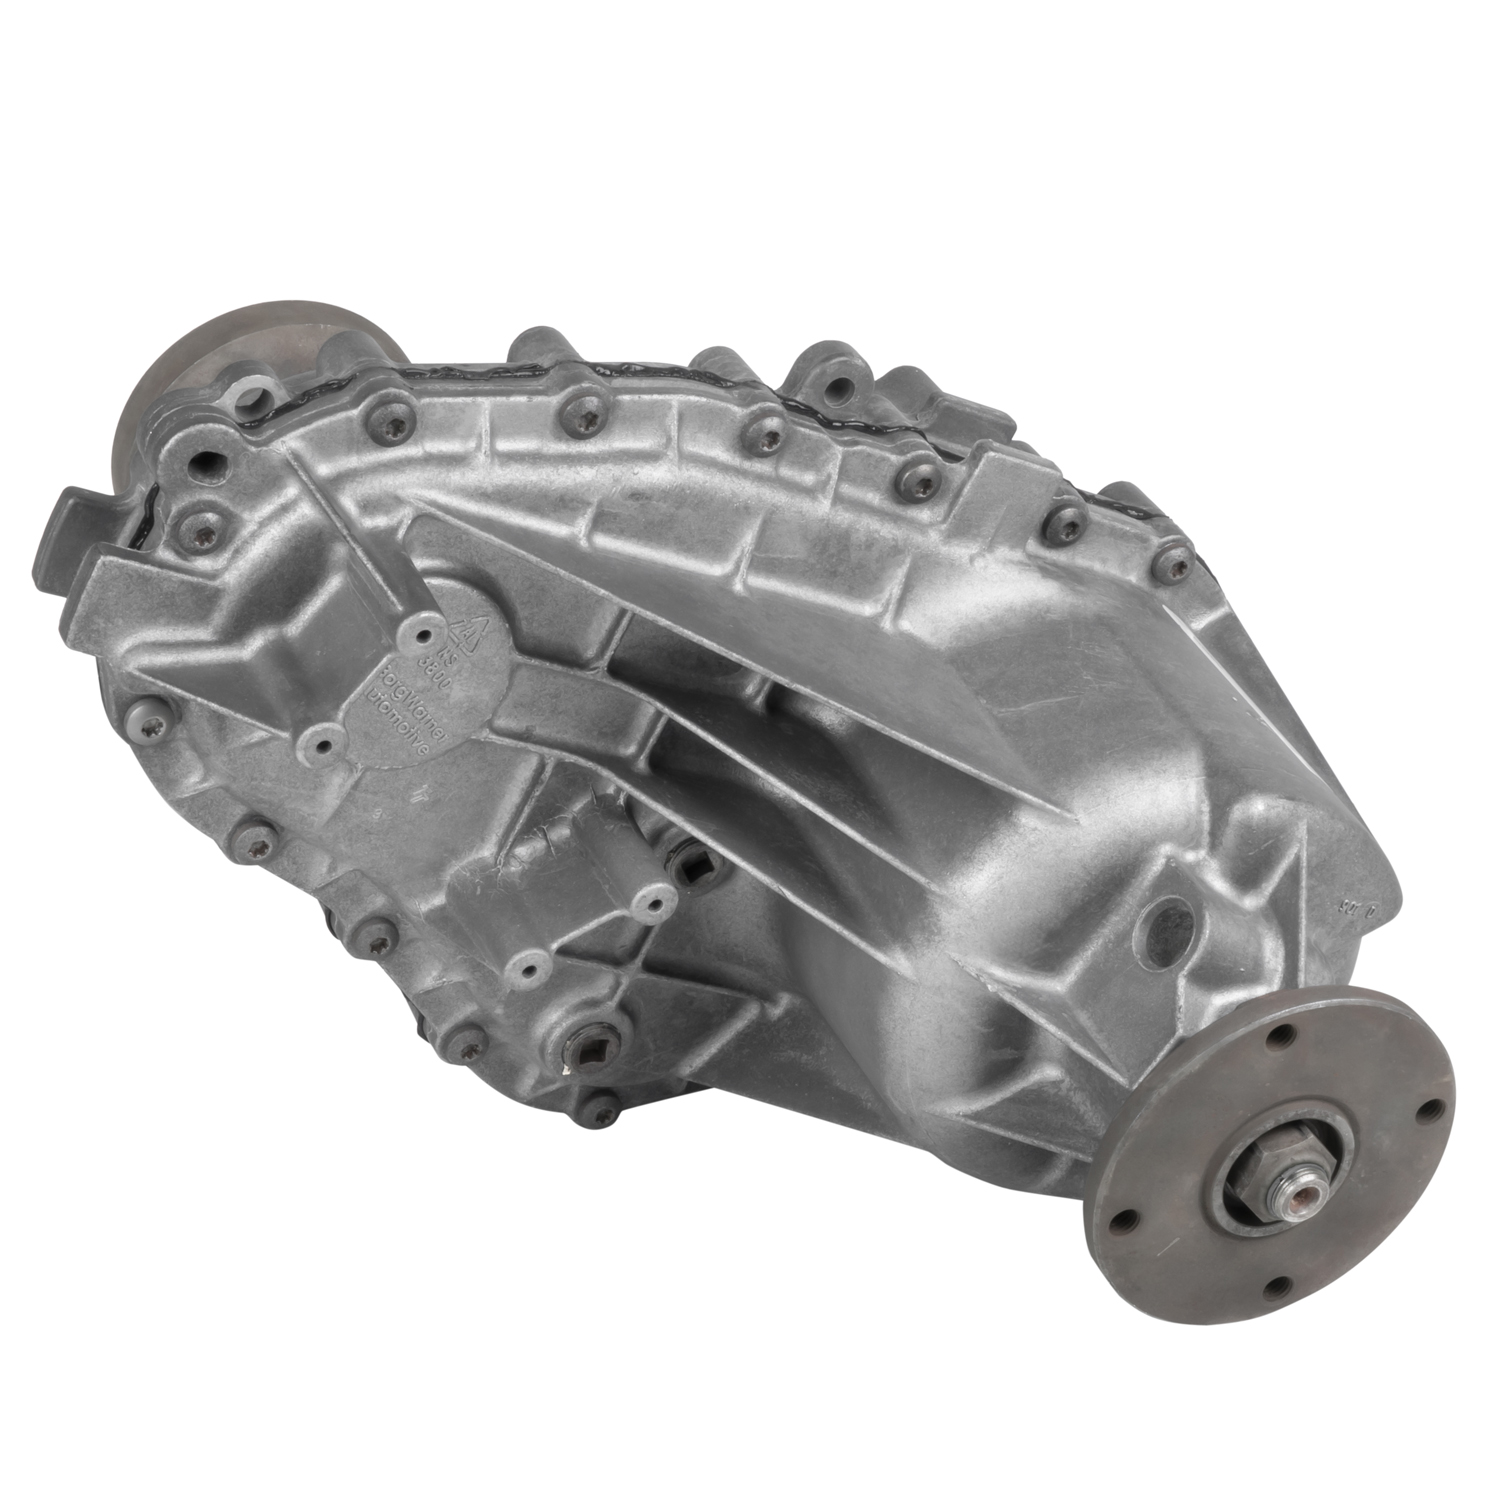 Remanufactured BW4404 Transfer Case for Ford 1998 Explorer & Mountaineer